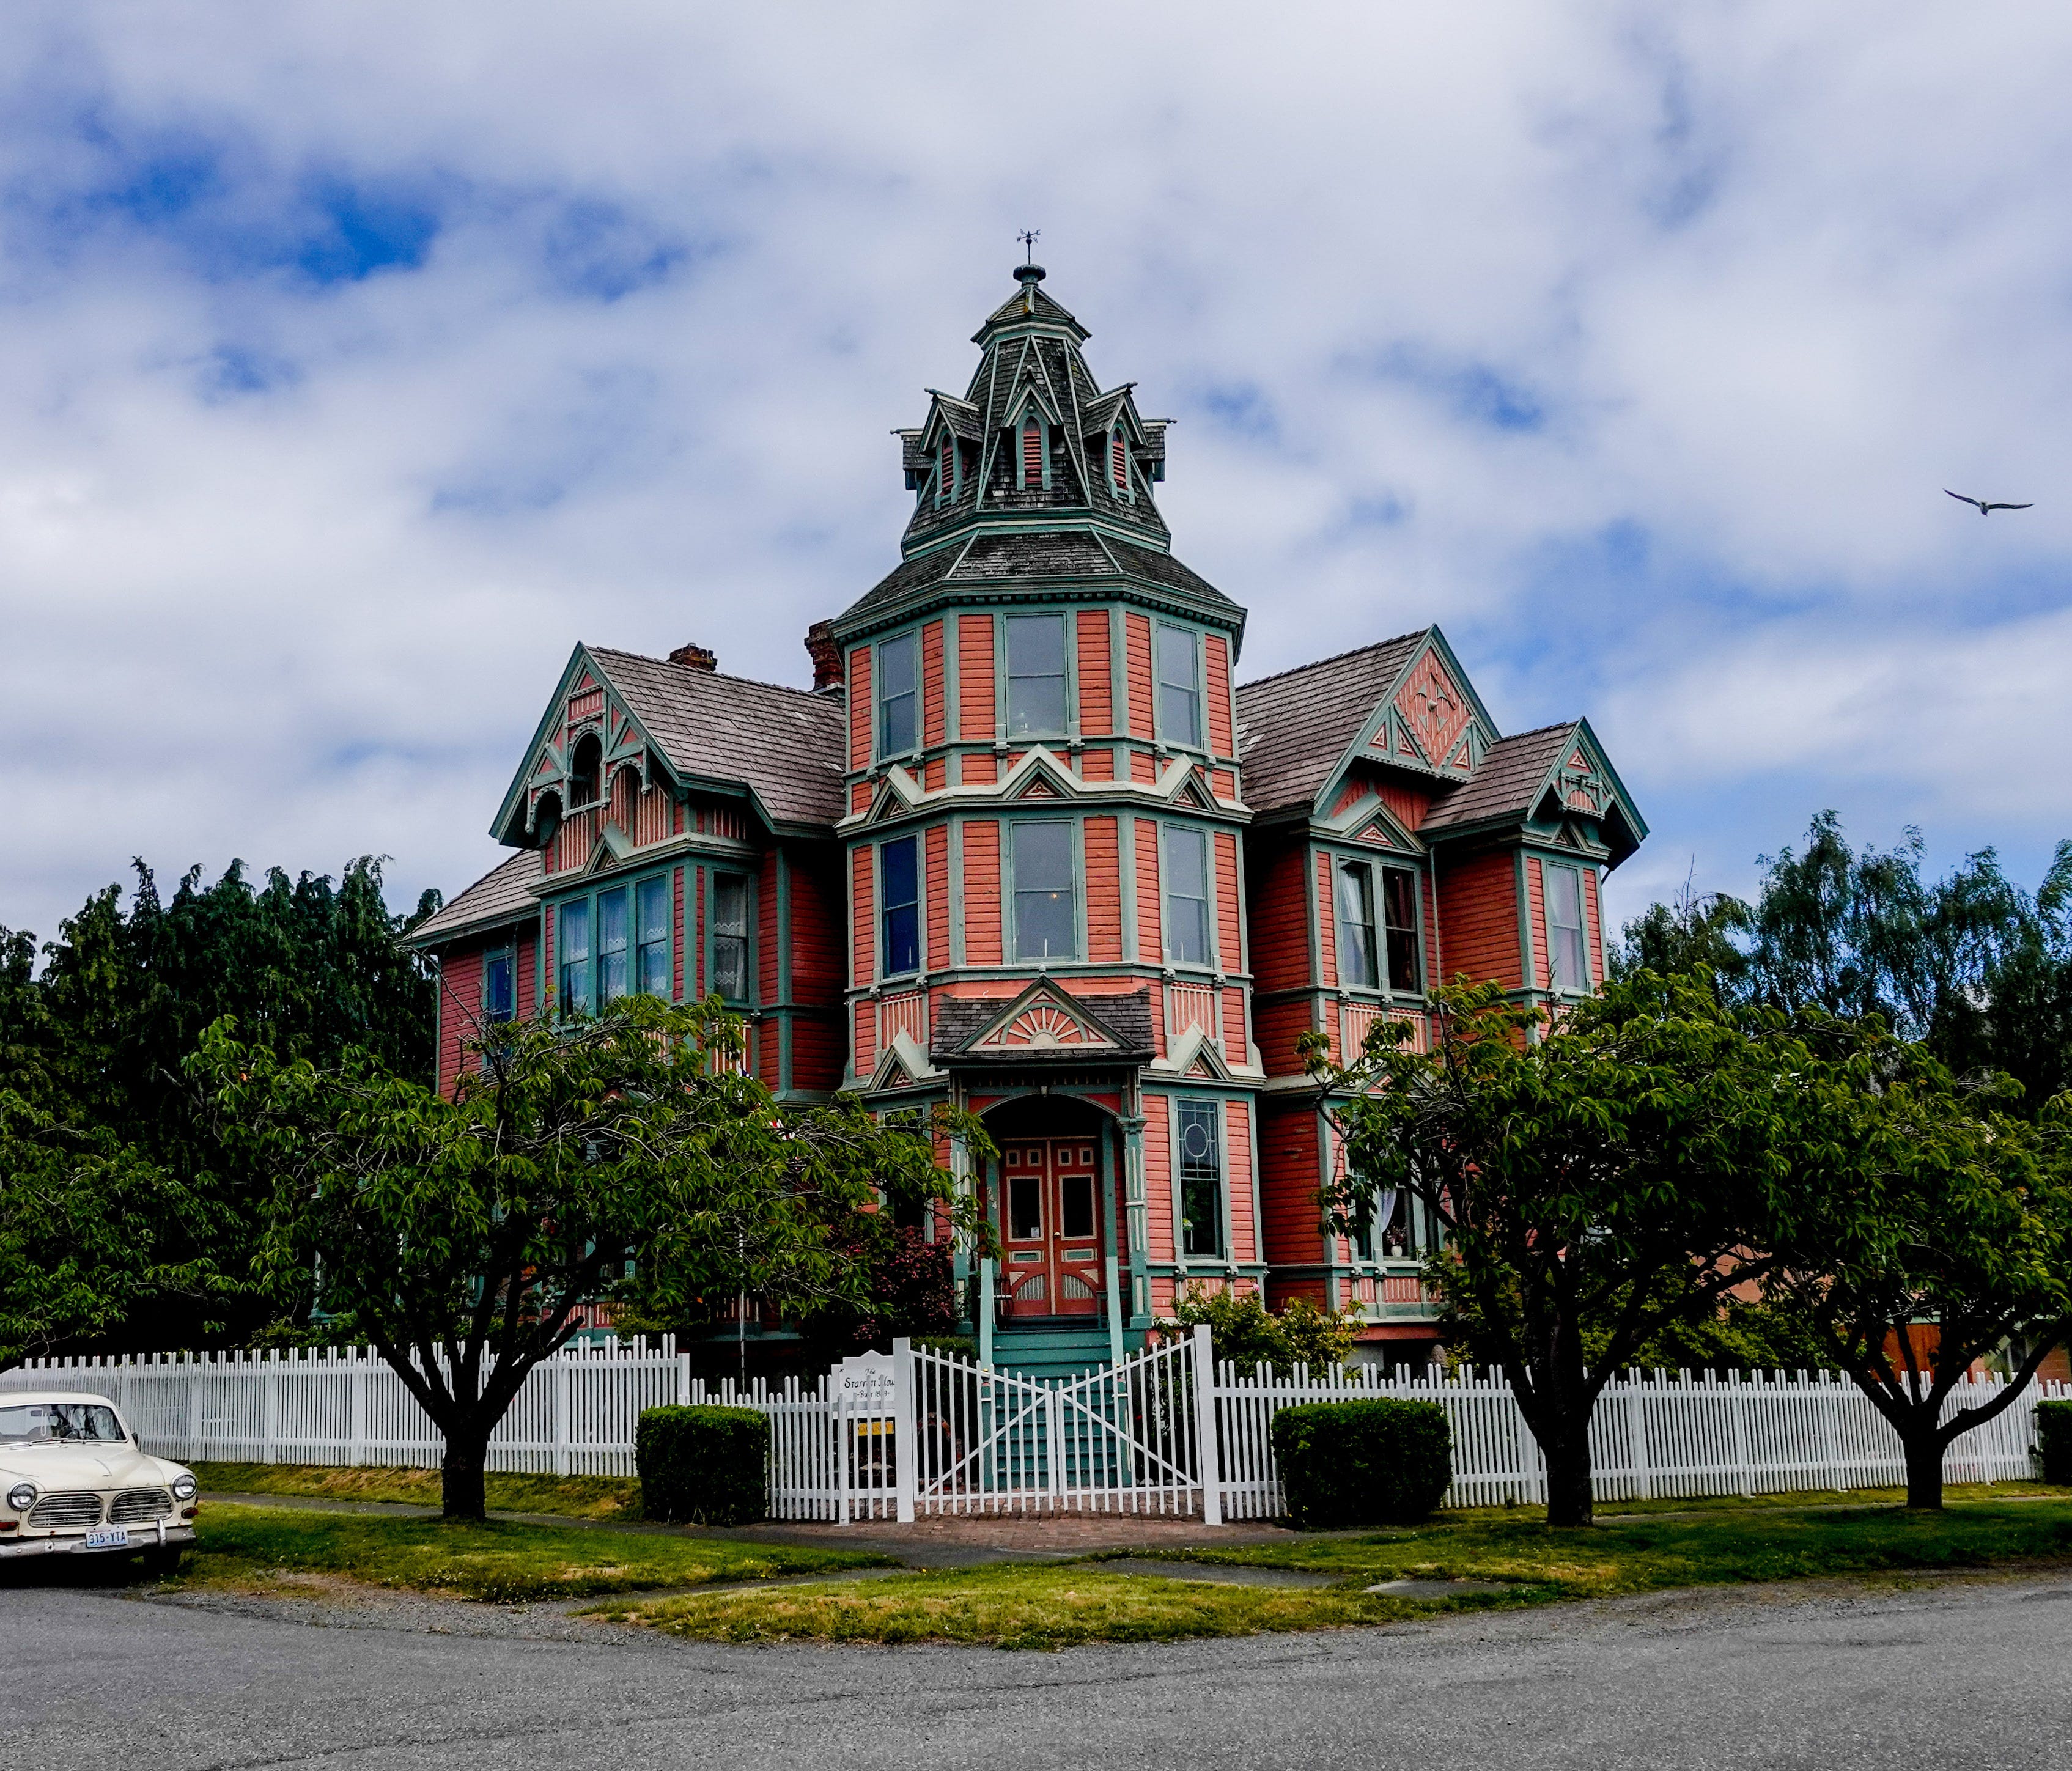 The city of Port Townsend,  lined with historic victorian mansions, is a photographer's  paradise. Jefferson Graham brings his camera to this Washington State landmark, home to 10,000 people.